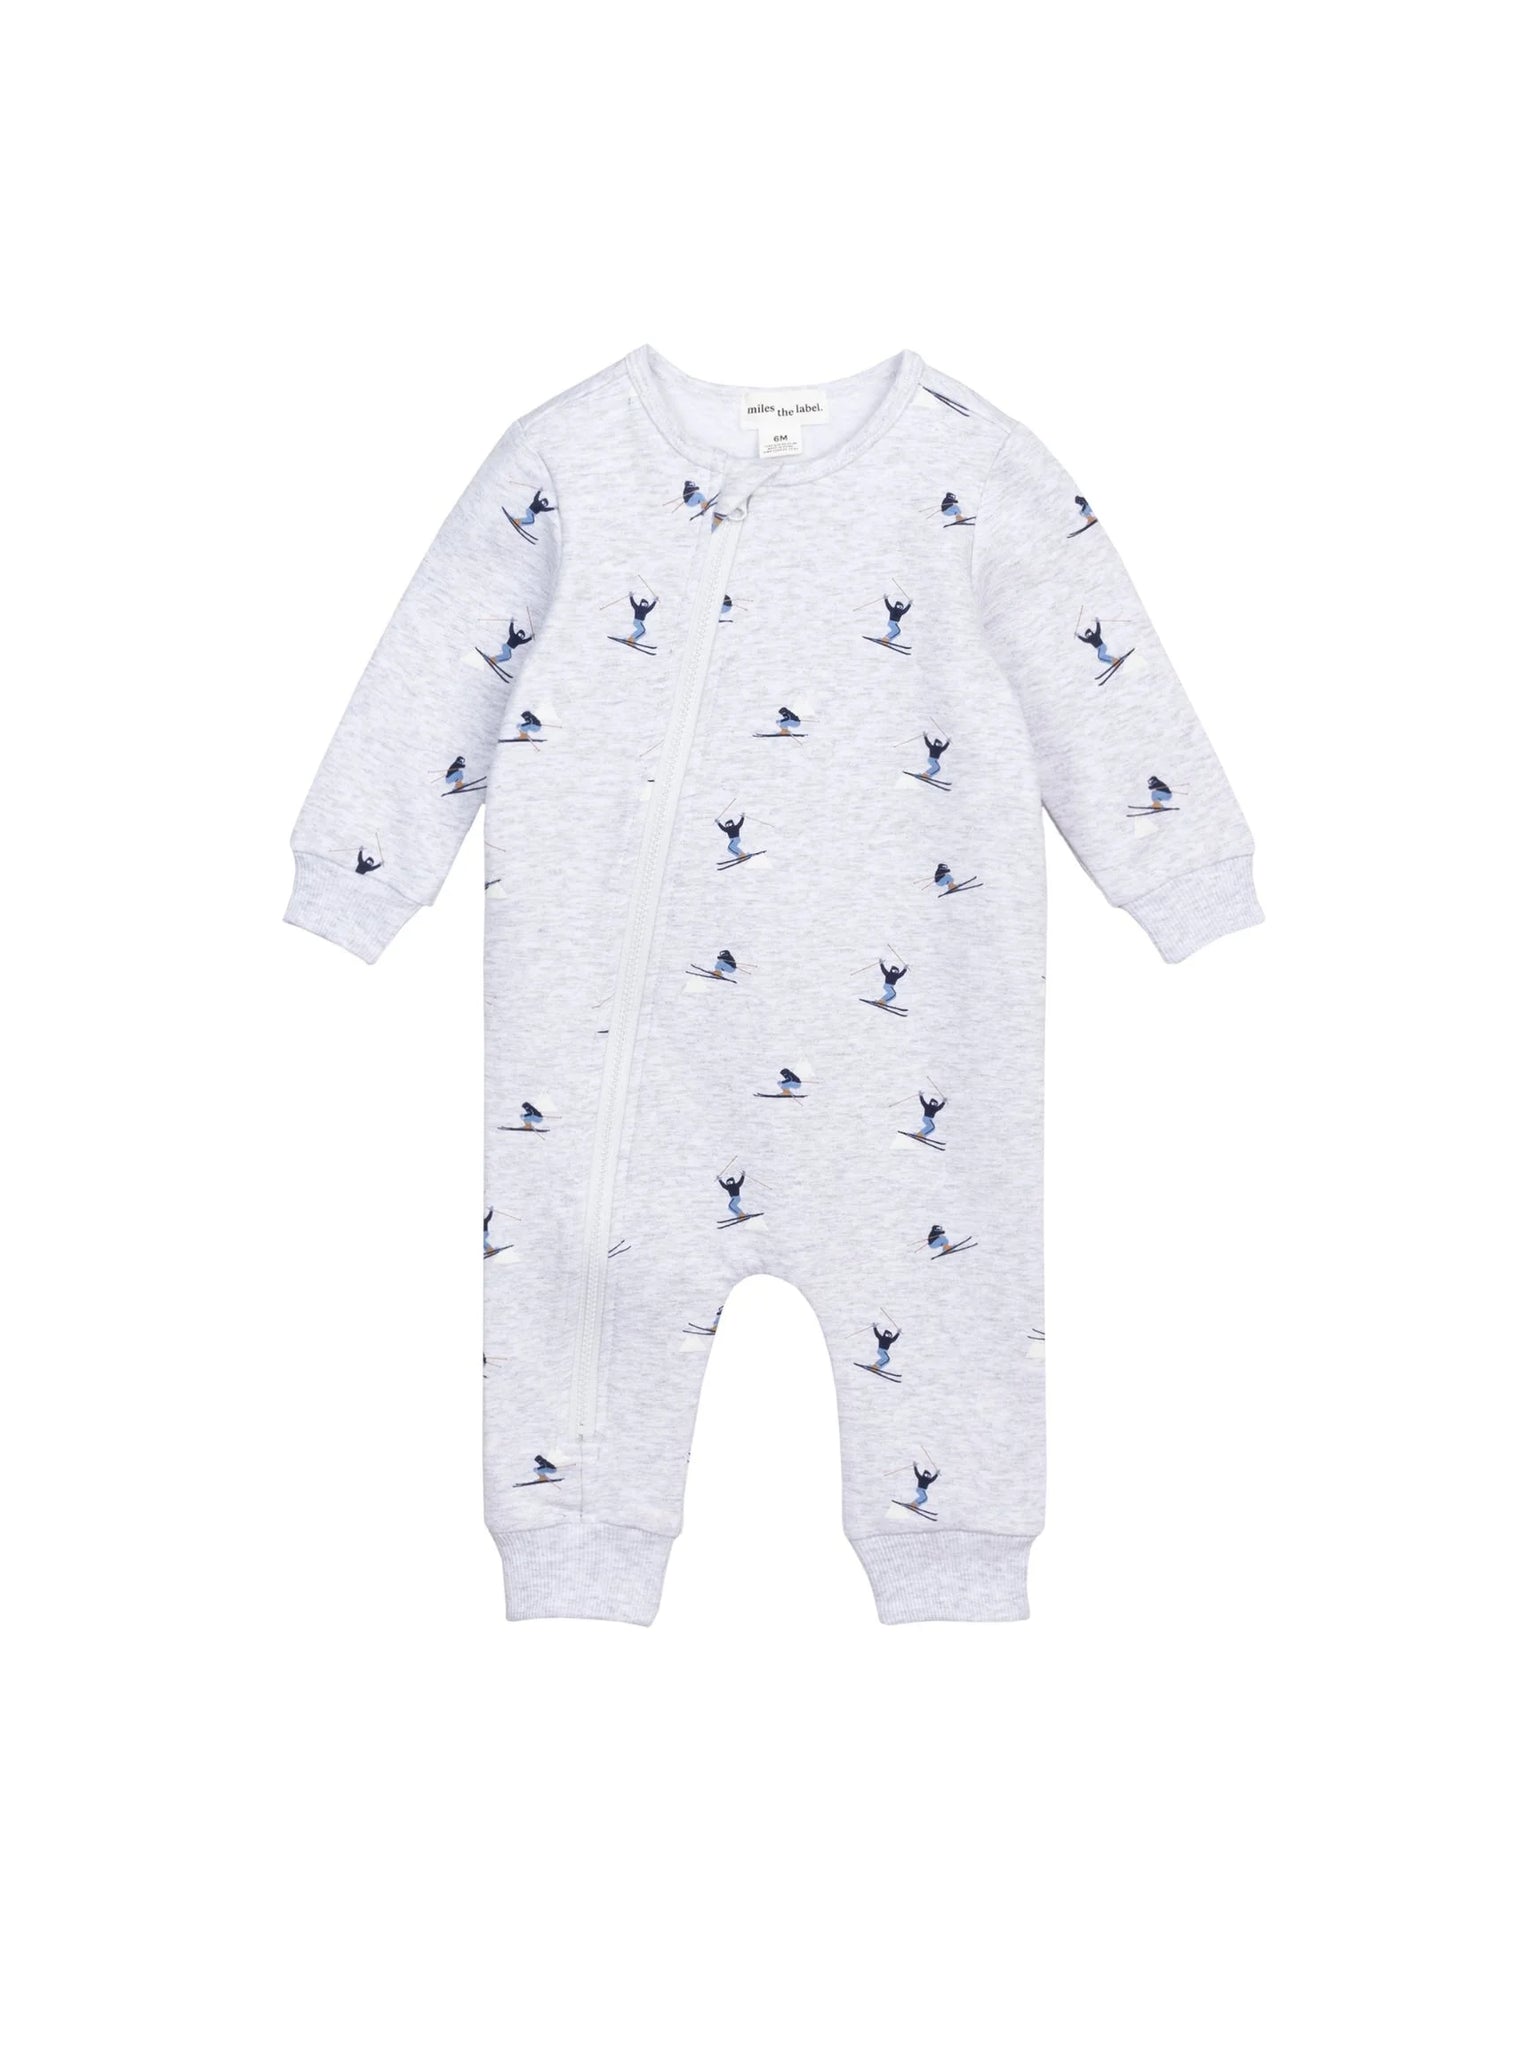 grey coverall with skiing print